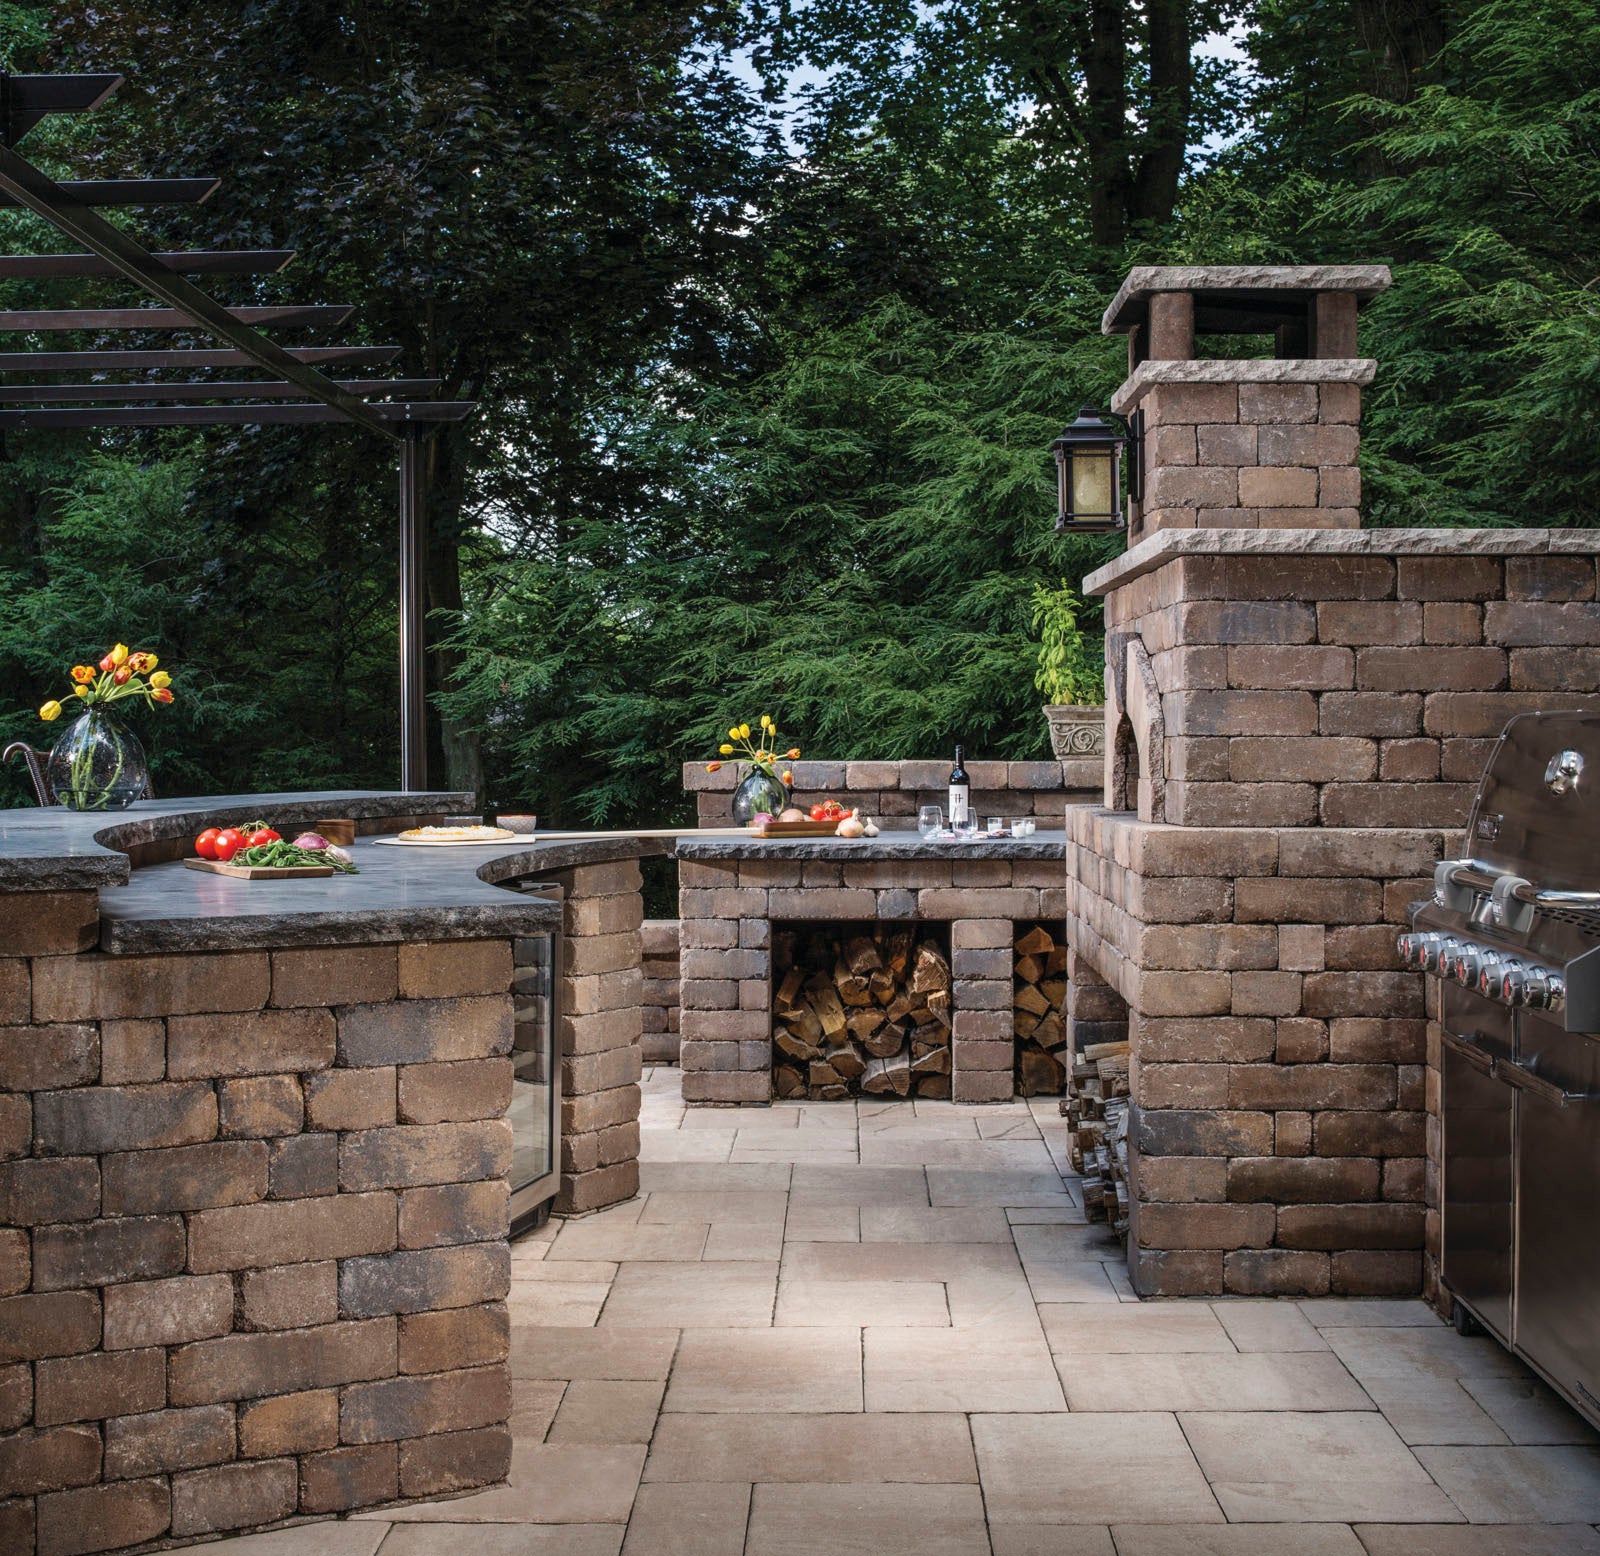 Weston Wall outdoor kitchen with pizza oven and wine cooler